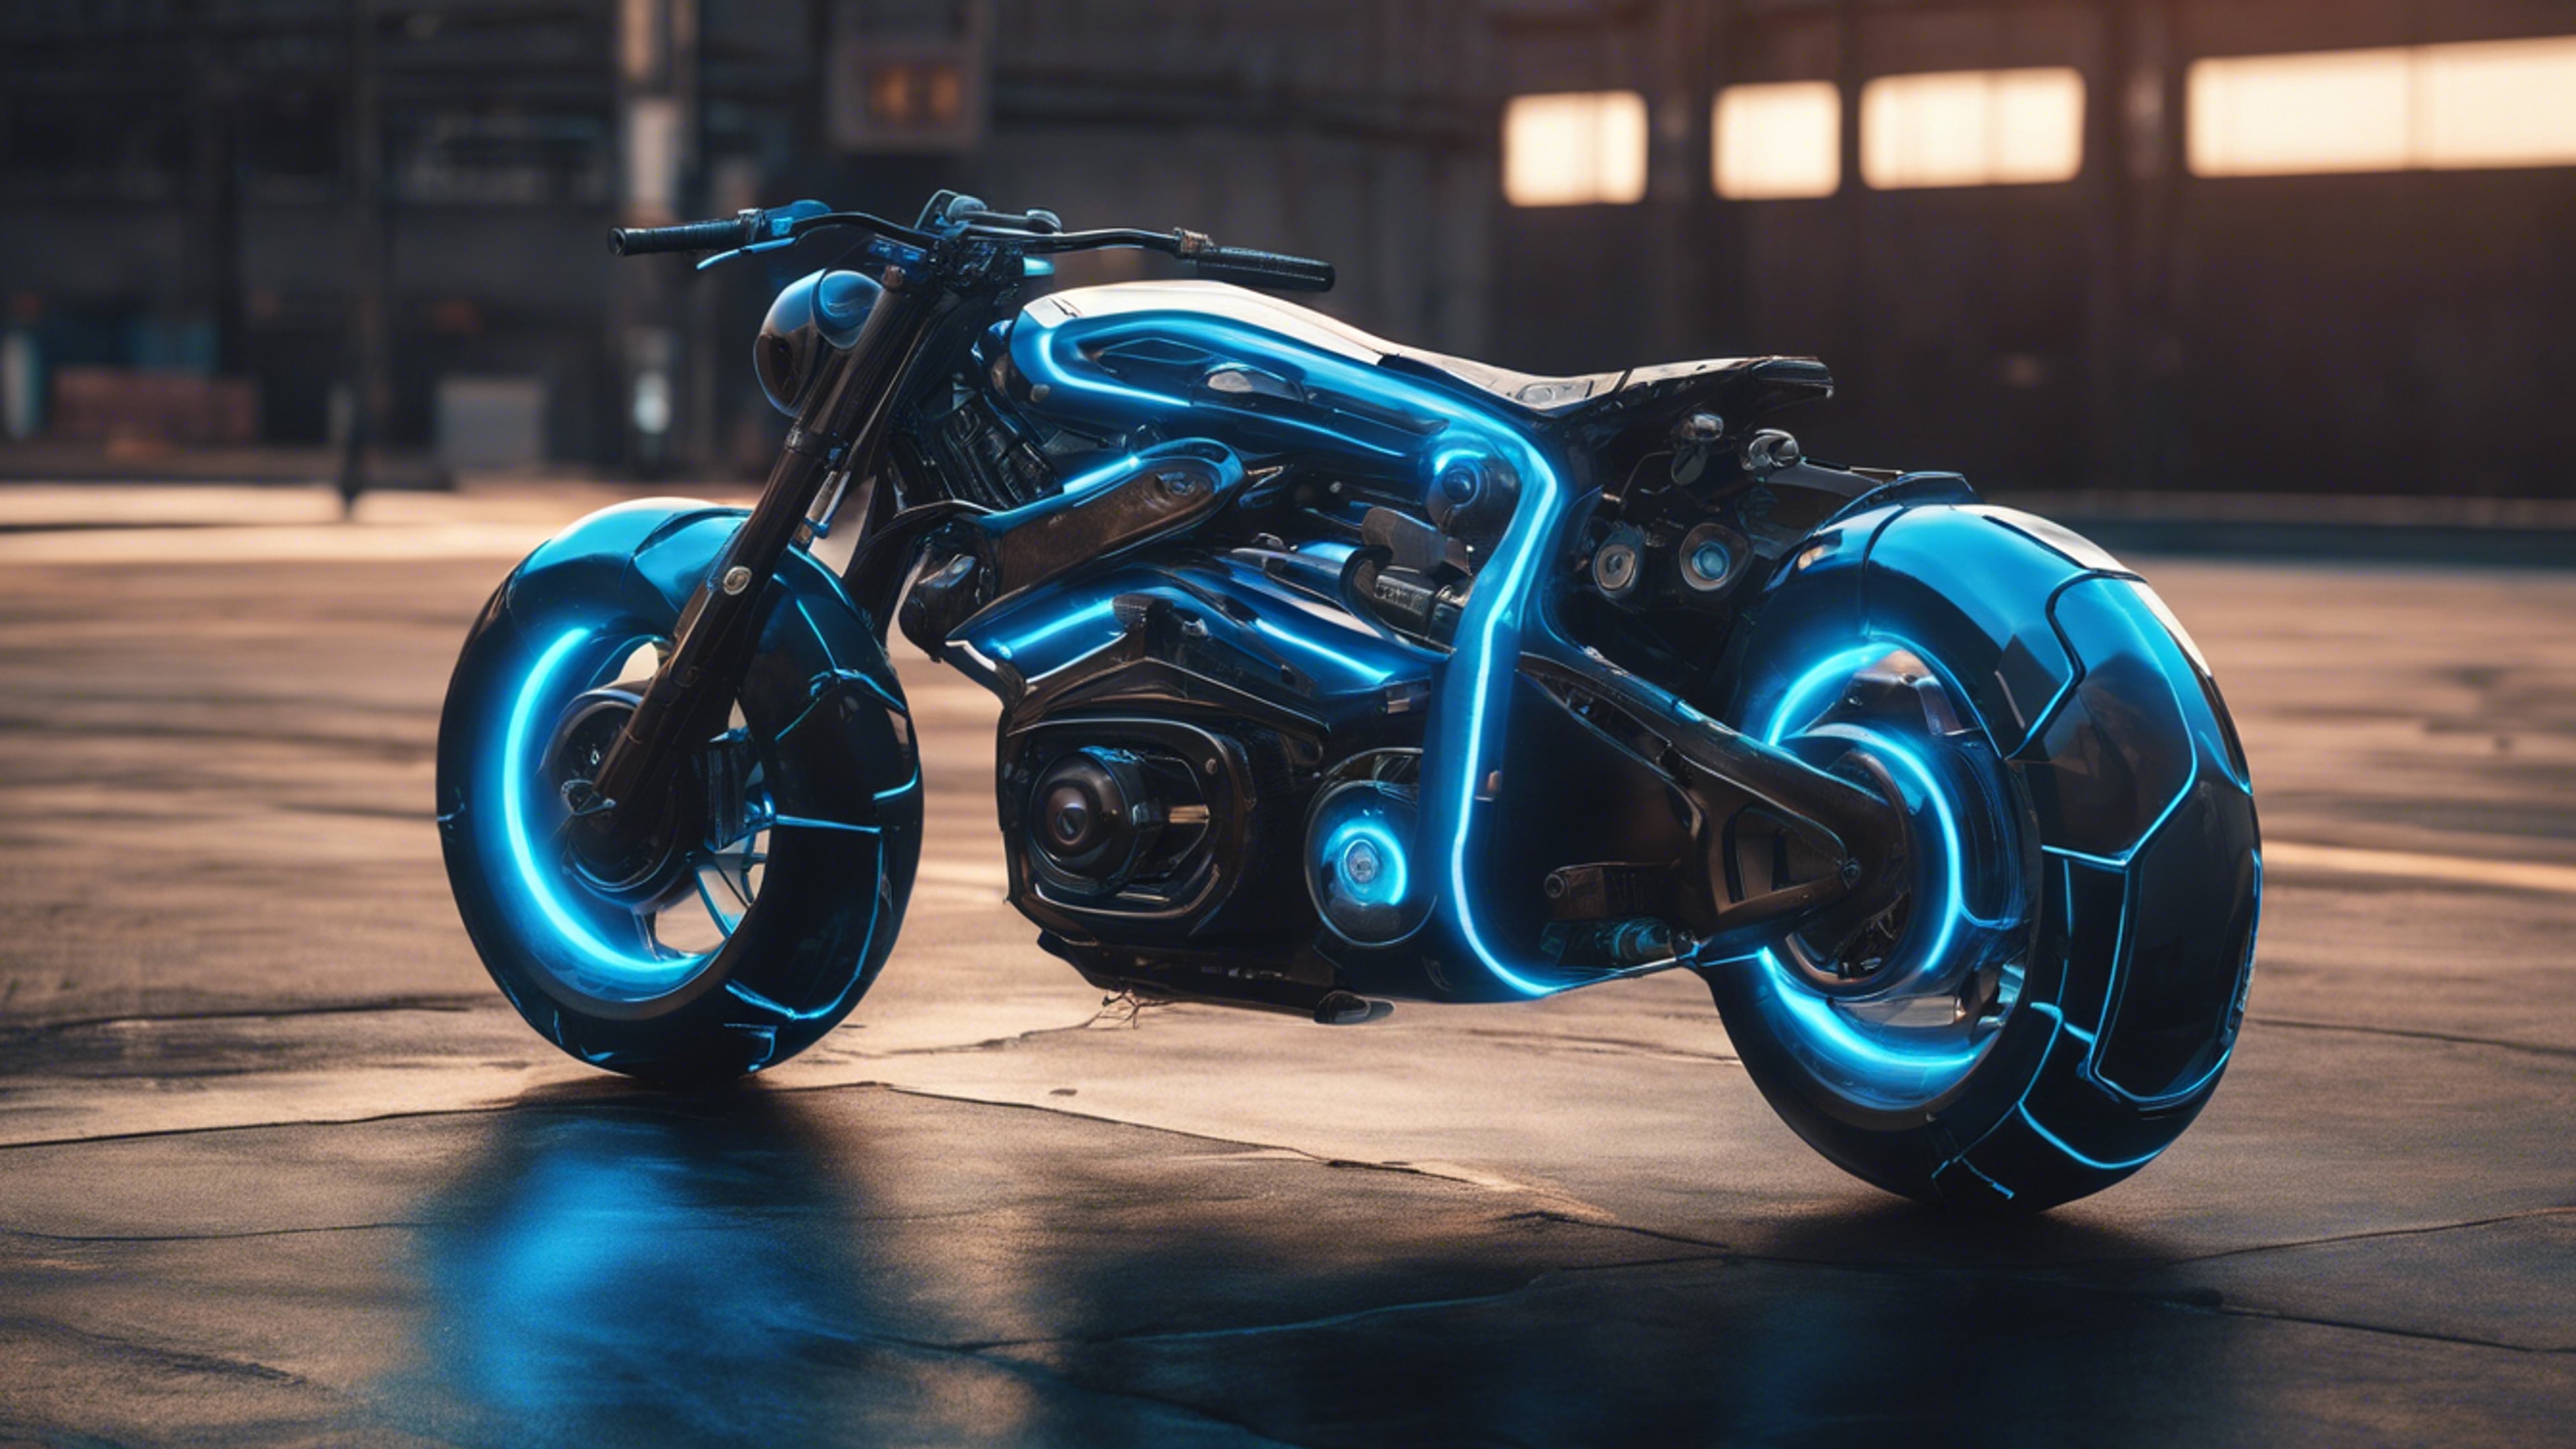 A concept art of a cool futuristic motorcycle, designed in neon black and blue colors. کاغذ دیواری[616cf7a0093641f39ad2]